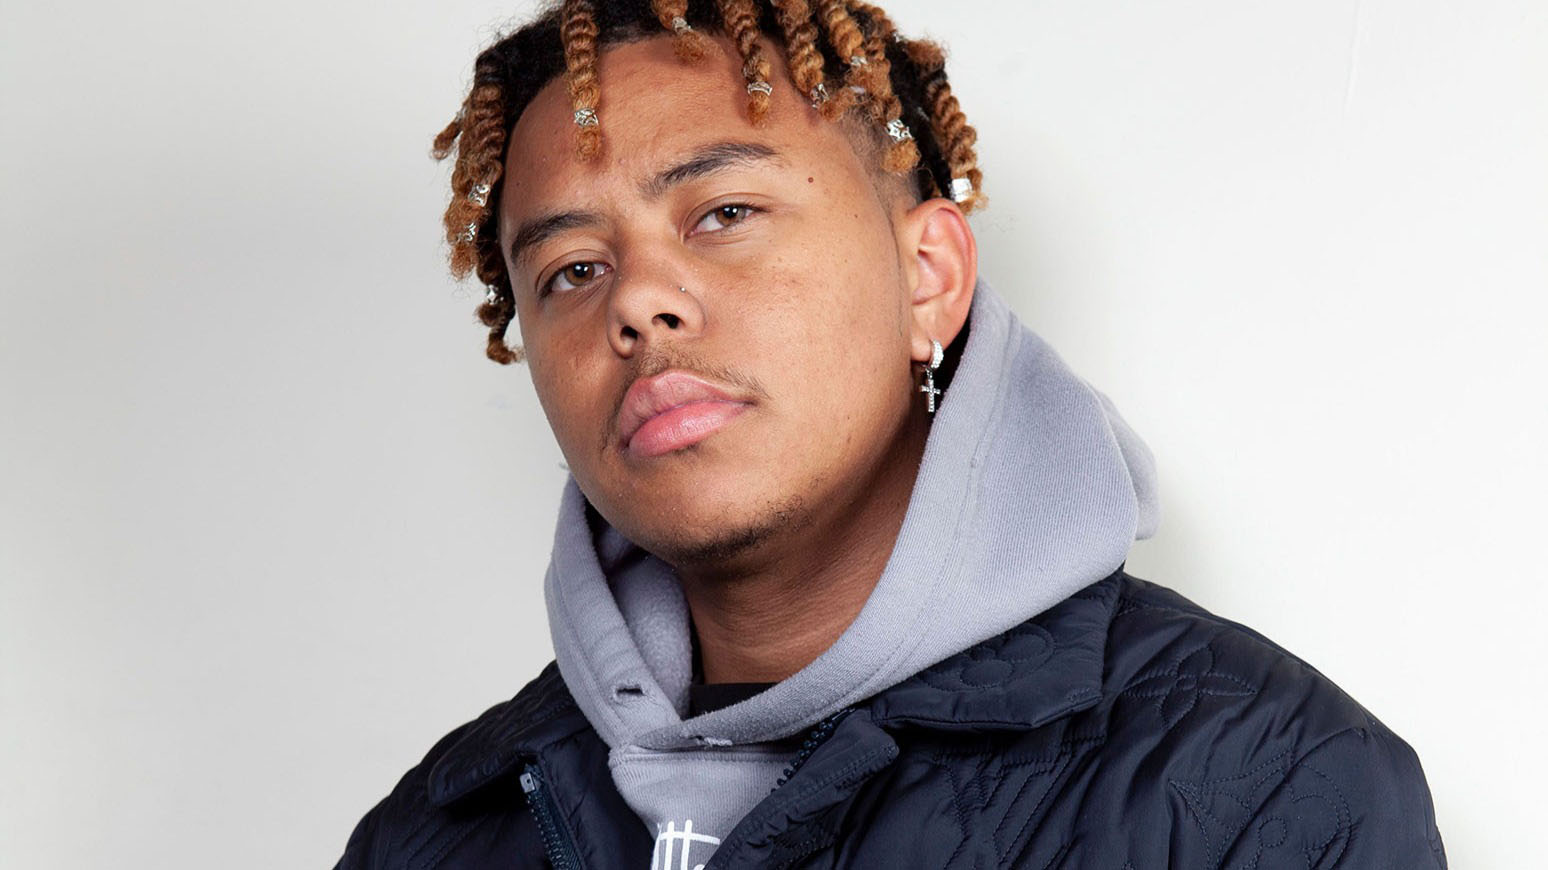 Cordae Amari Dunston (born August 26, 1997; formerly known as YBN Cordae and Entendre), known mononymously as Cordae, is an American rapper, singer, a...